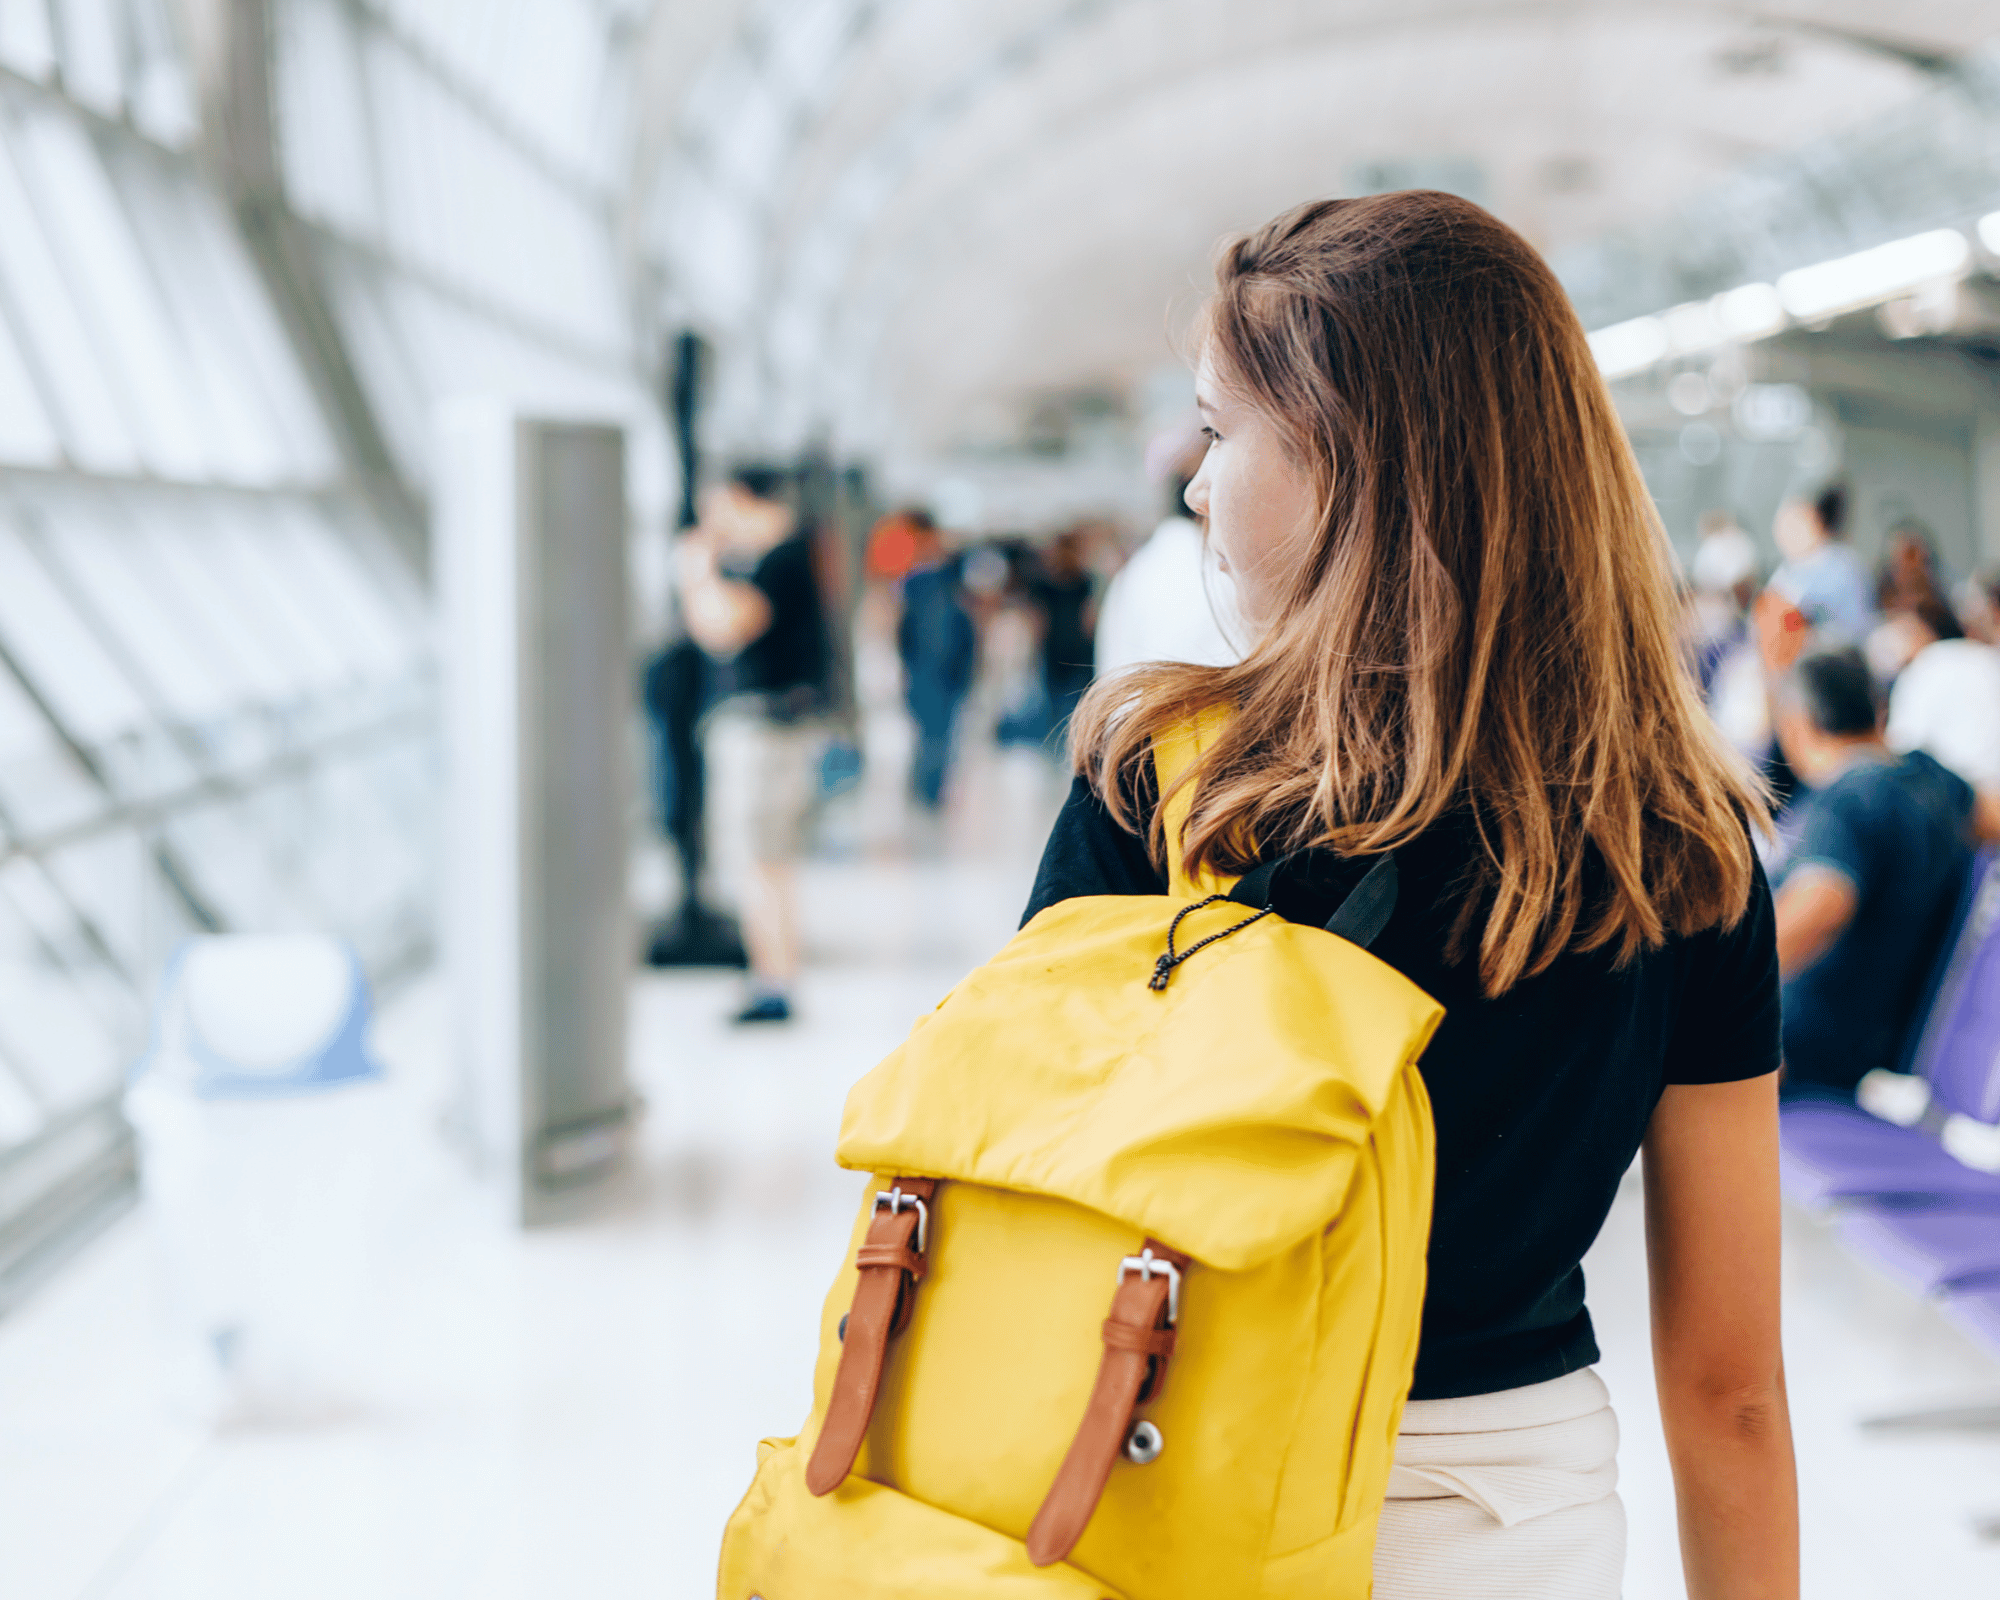 Flying Out of the Country for the First Time: How to Prepare